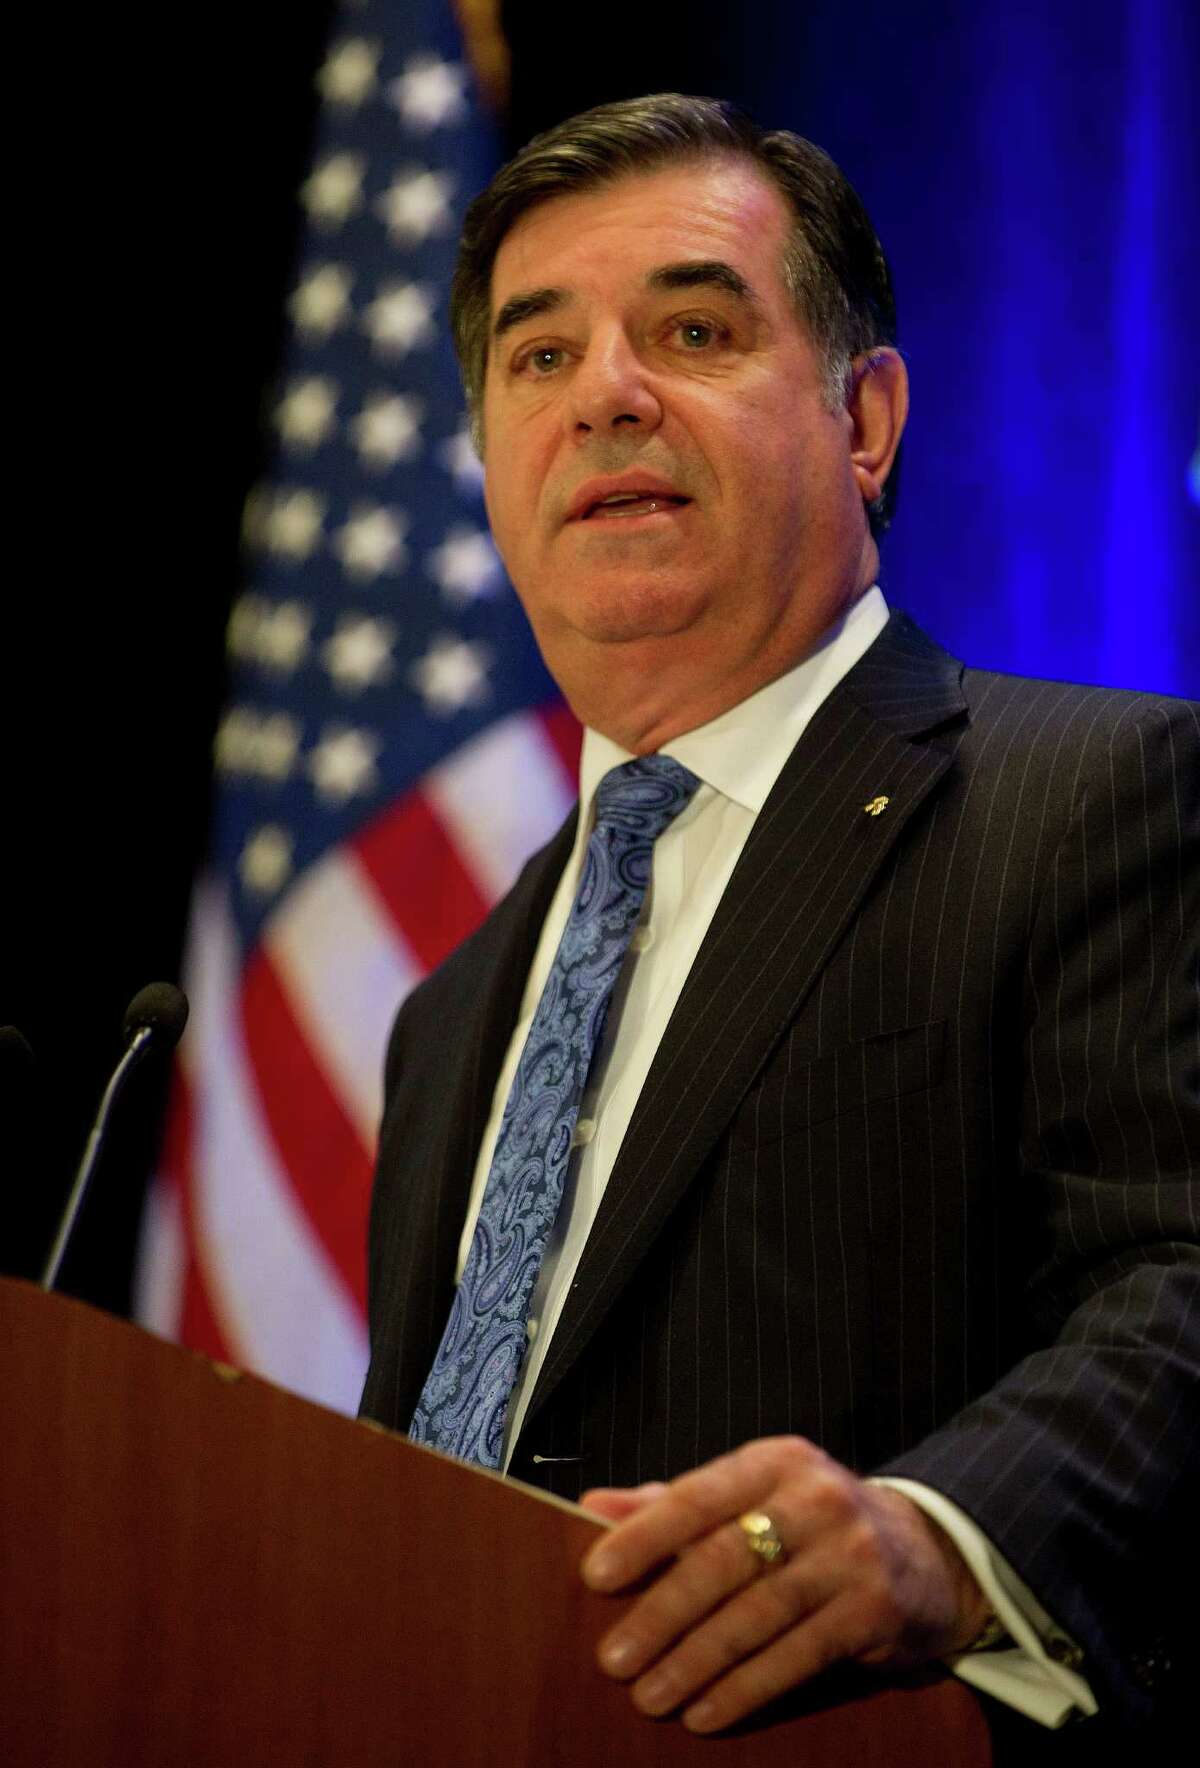 Stamford Mayor Michael Pavia presents the State of the City Address to the Chamber of Commerce at the Stamford Marriott Hotel on Wednesday, April 24, 2013.